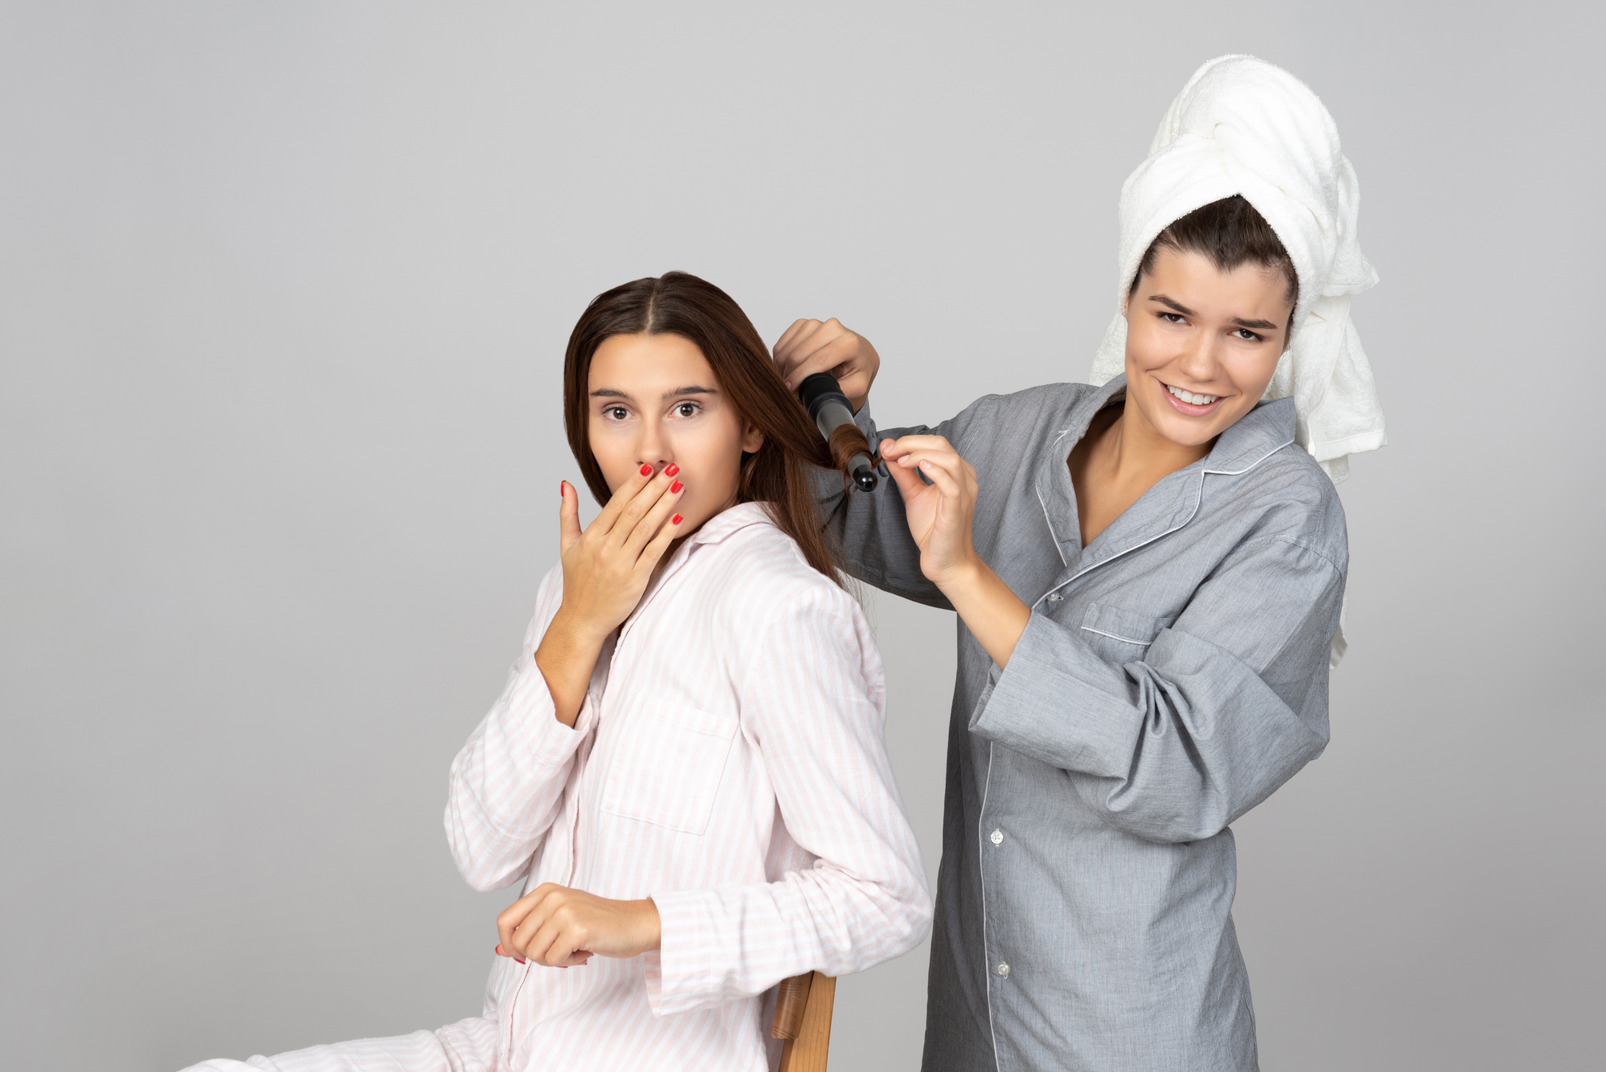 Woman styling her friend's hair with hairstyling iron